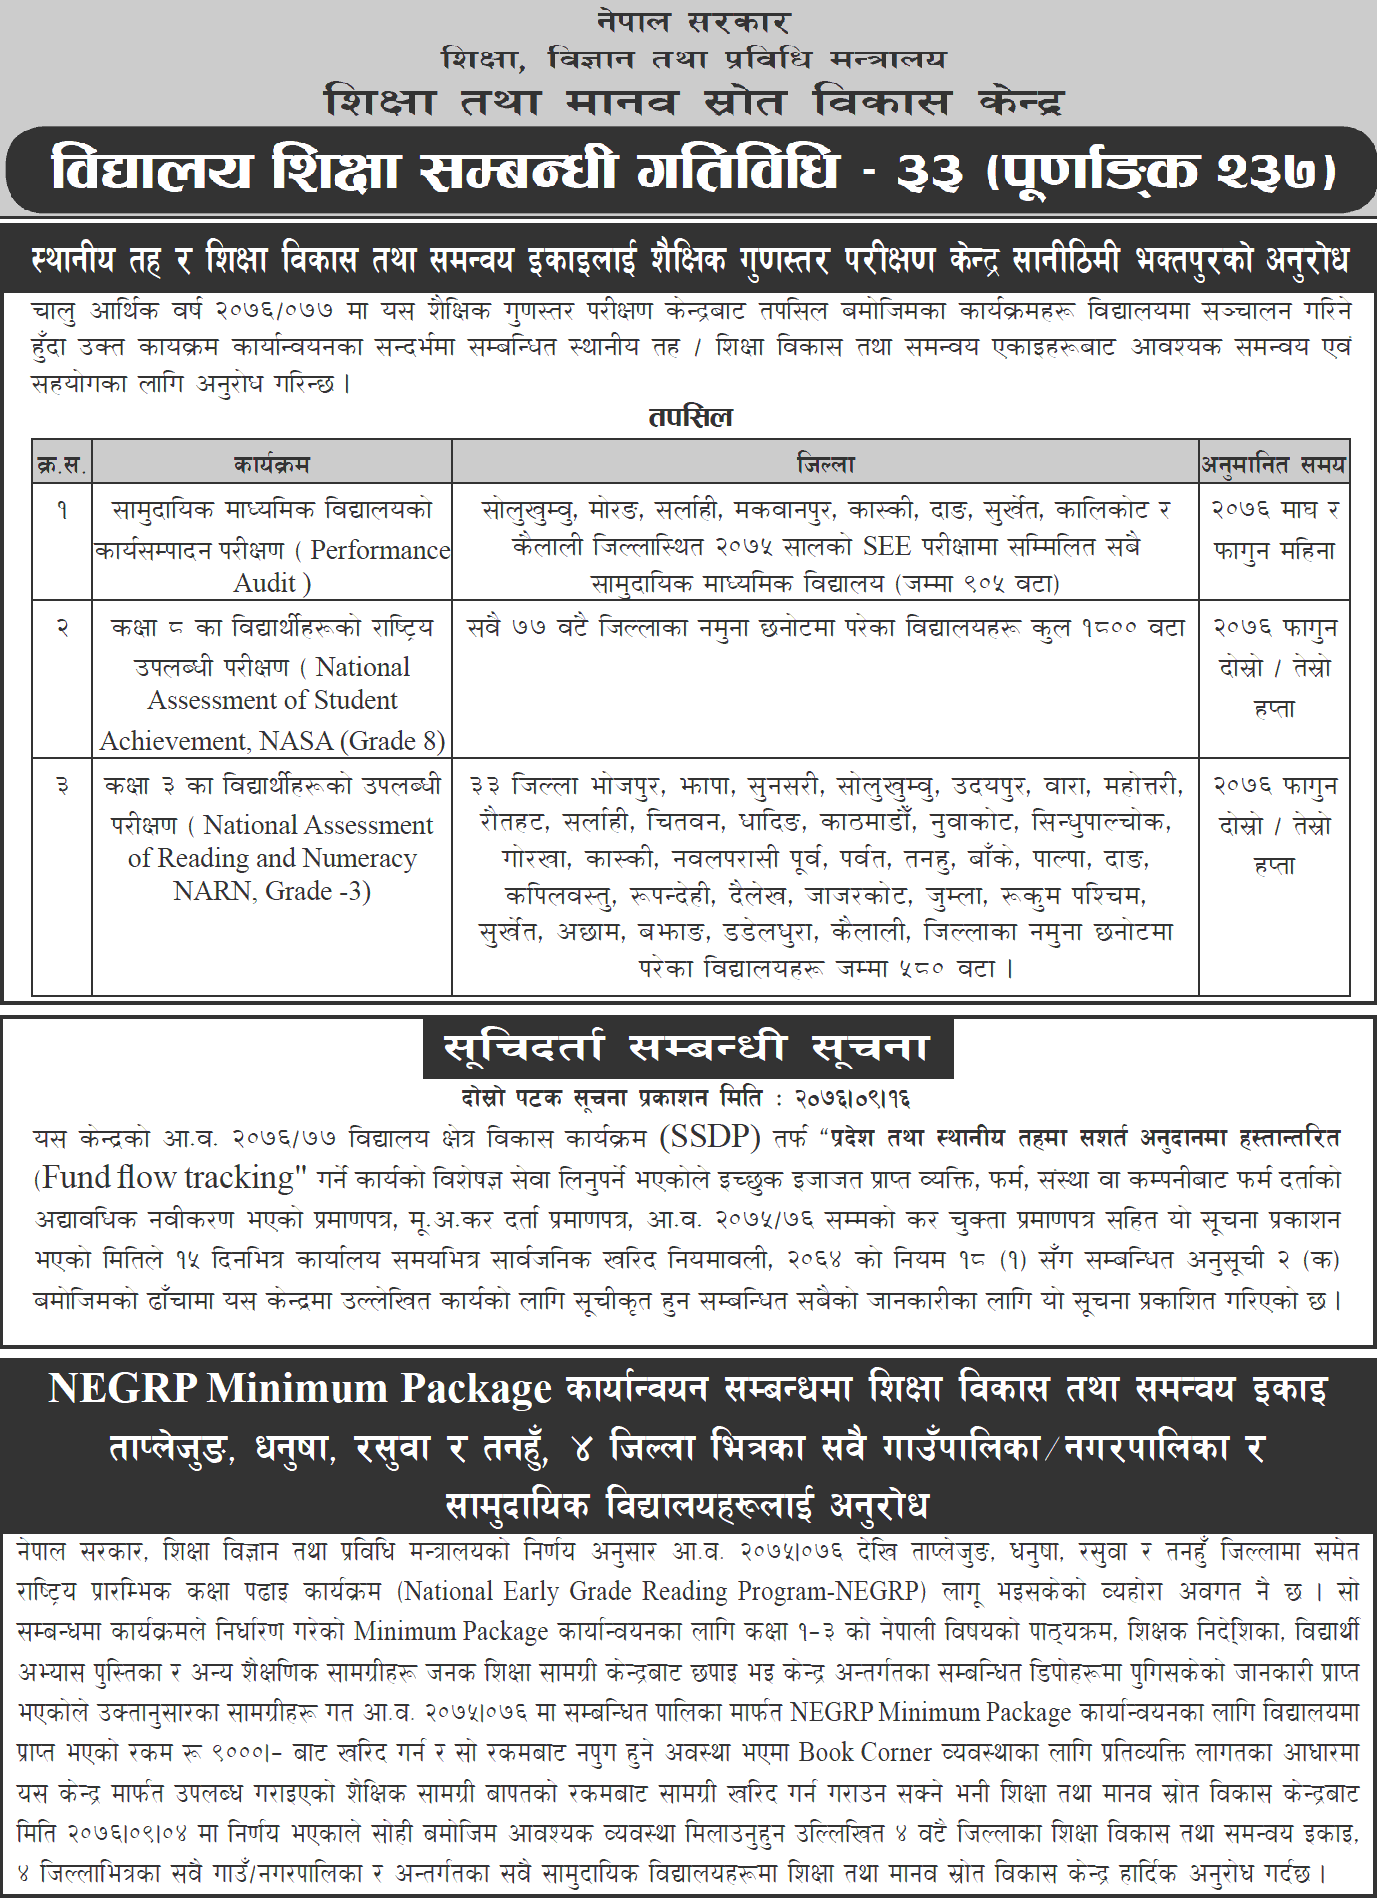 Ministry of Education Published Weekly Notices 2076 Poush 16